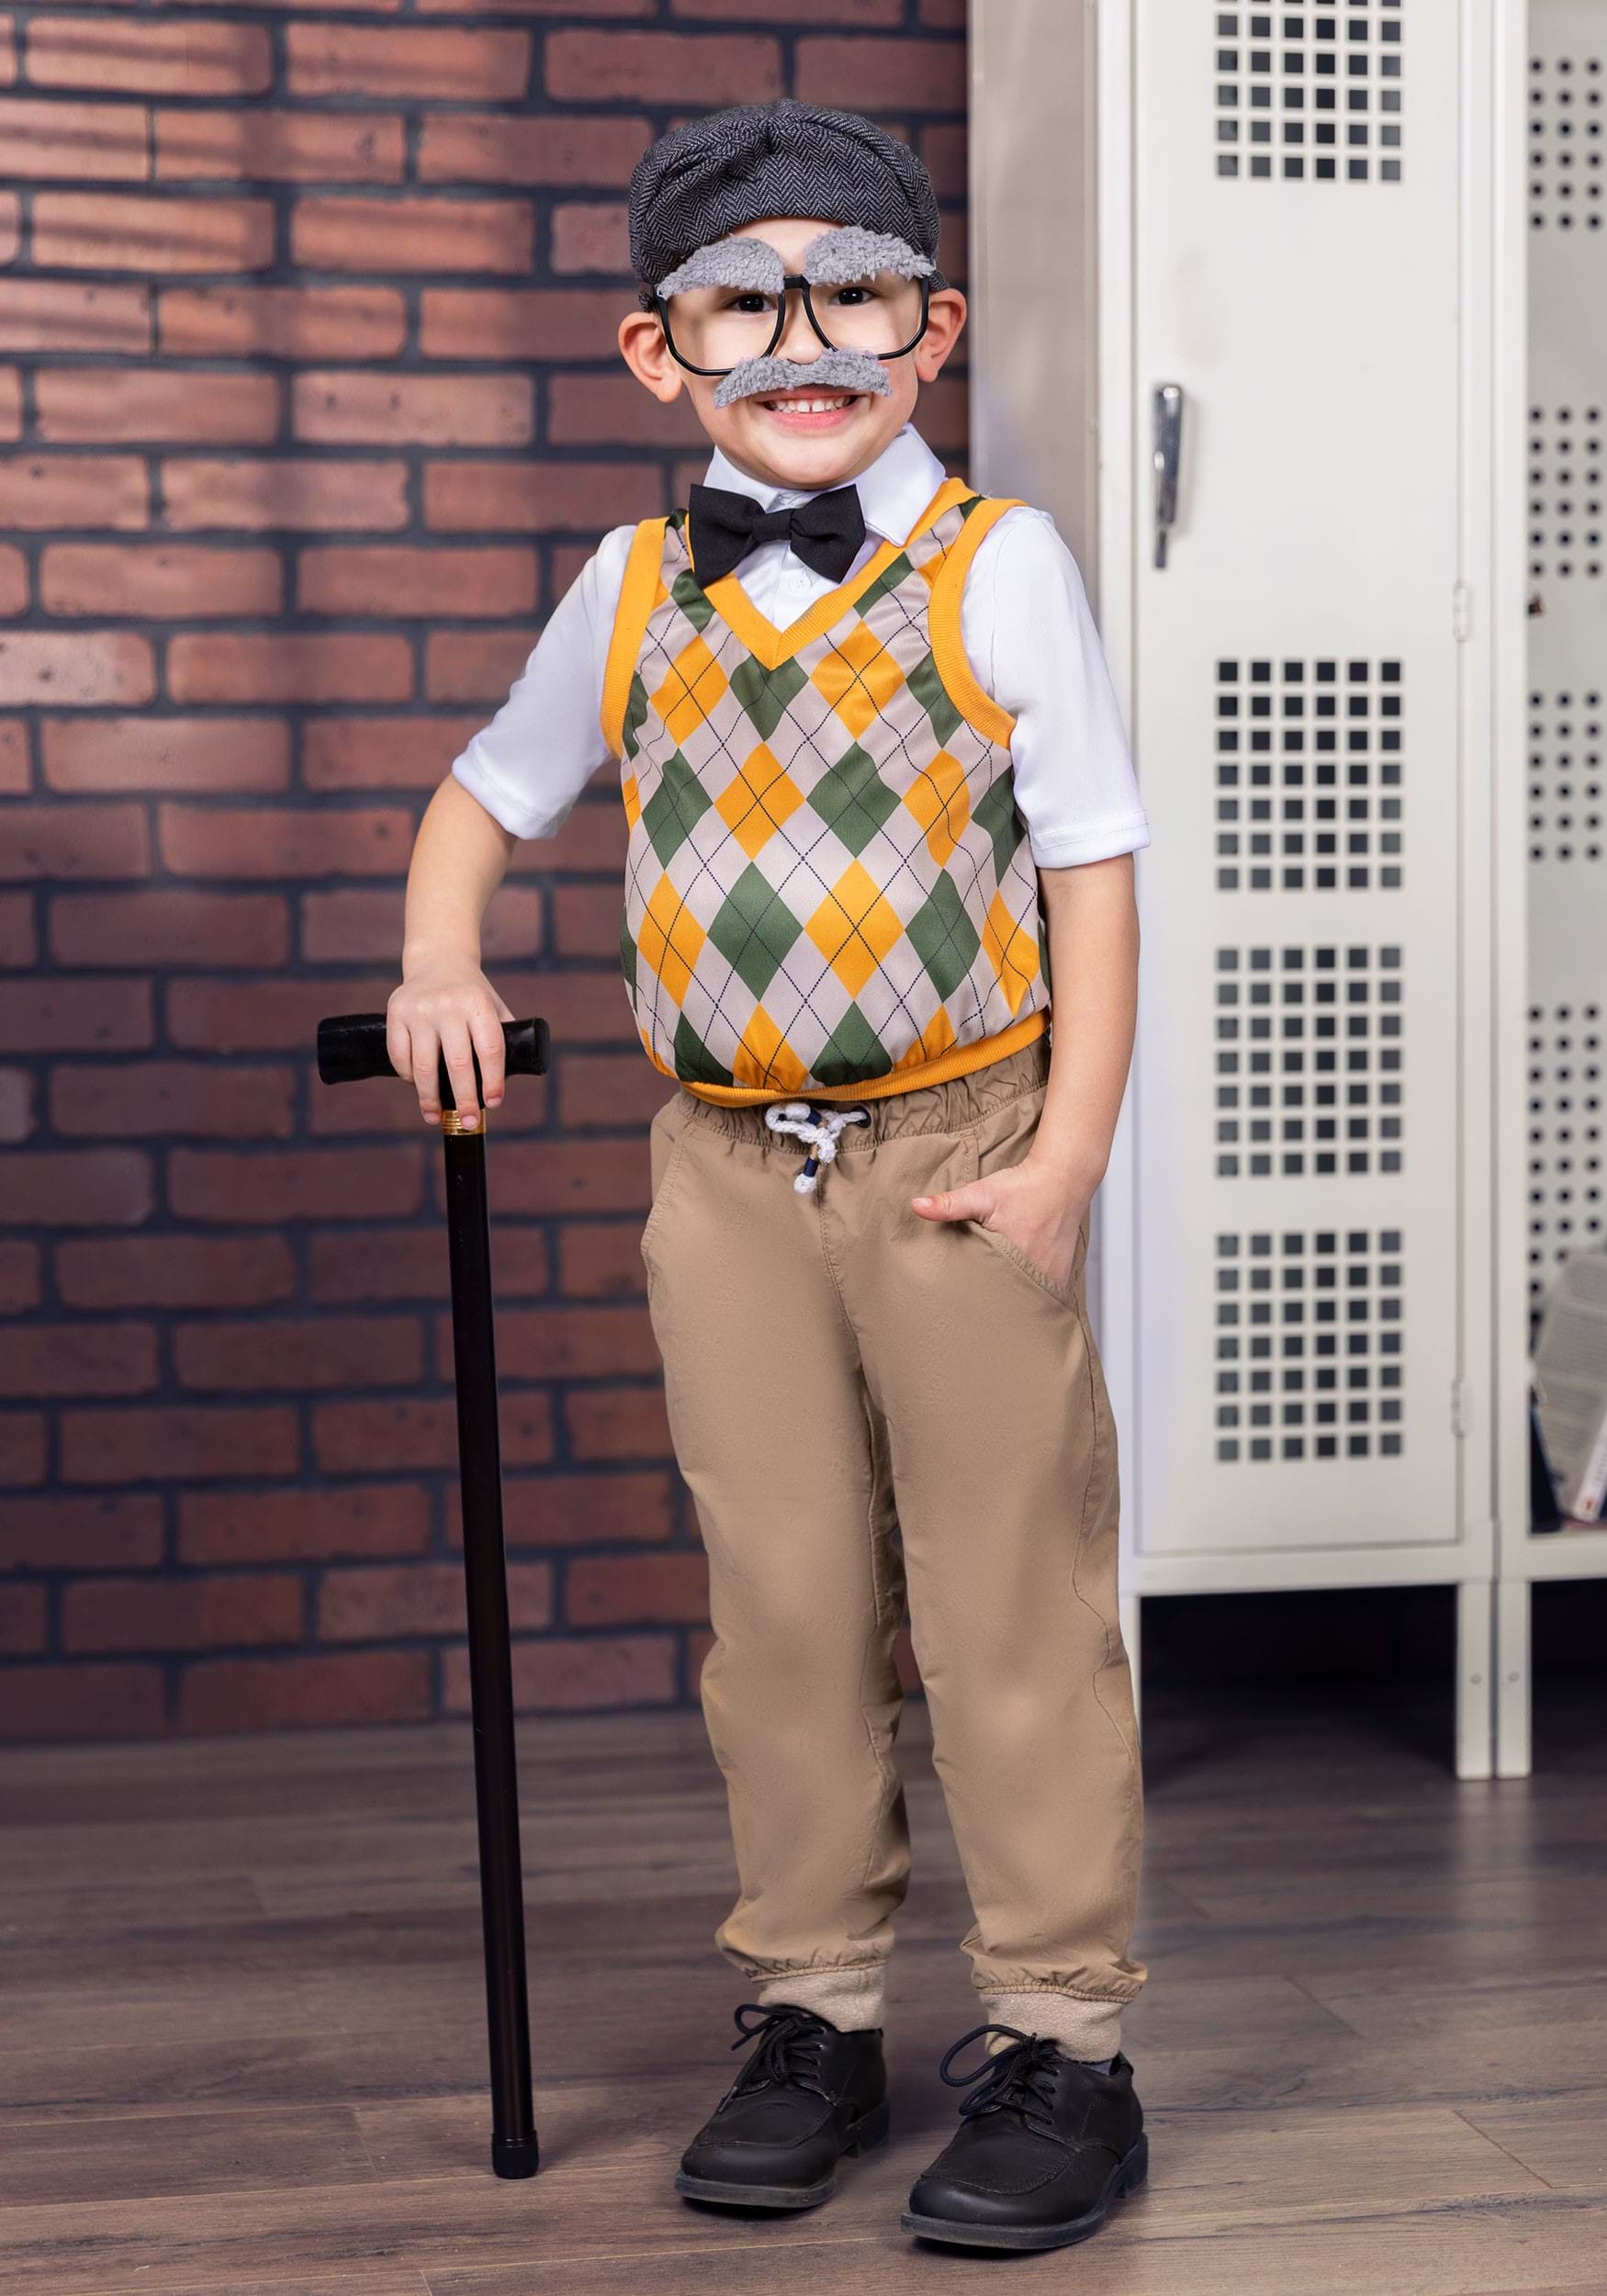 old man outfit for kid